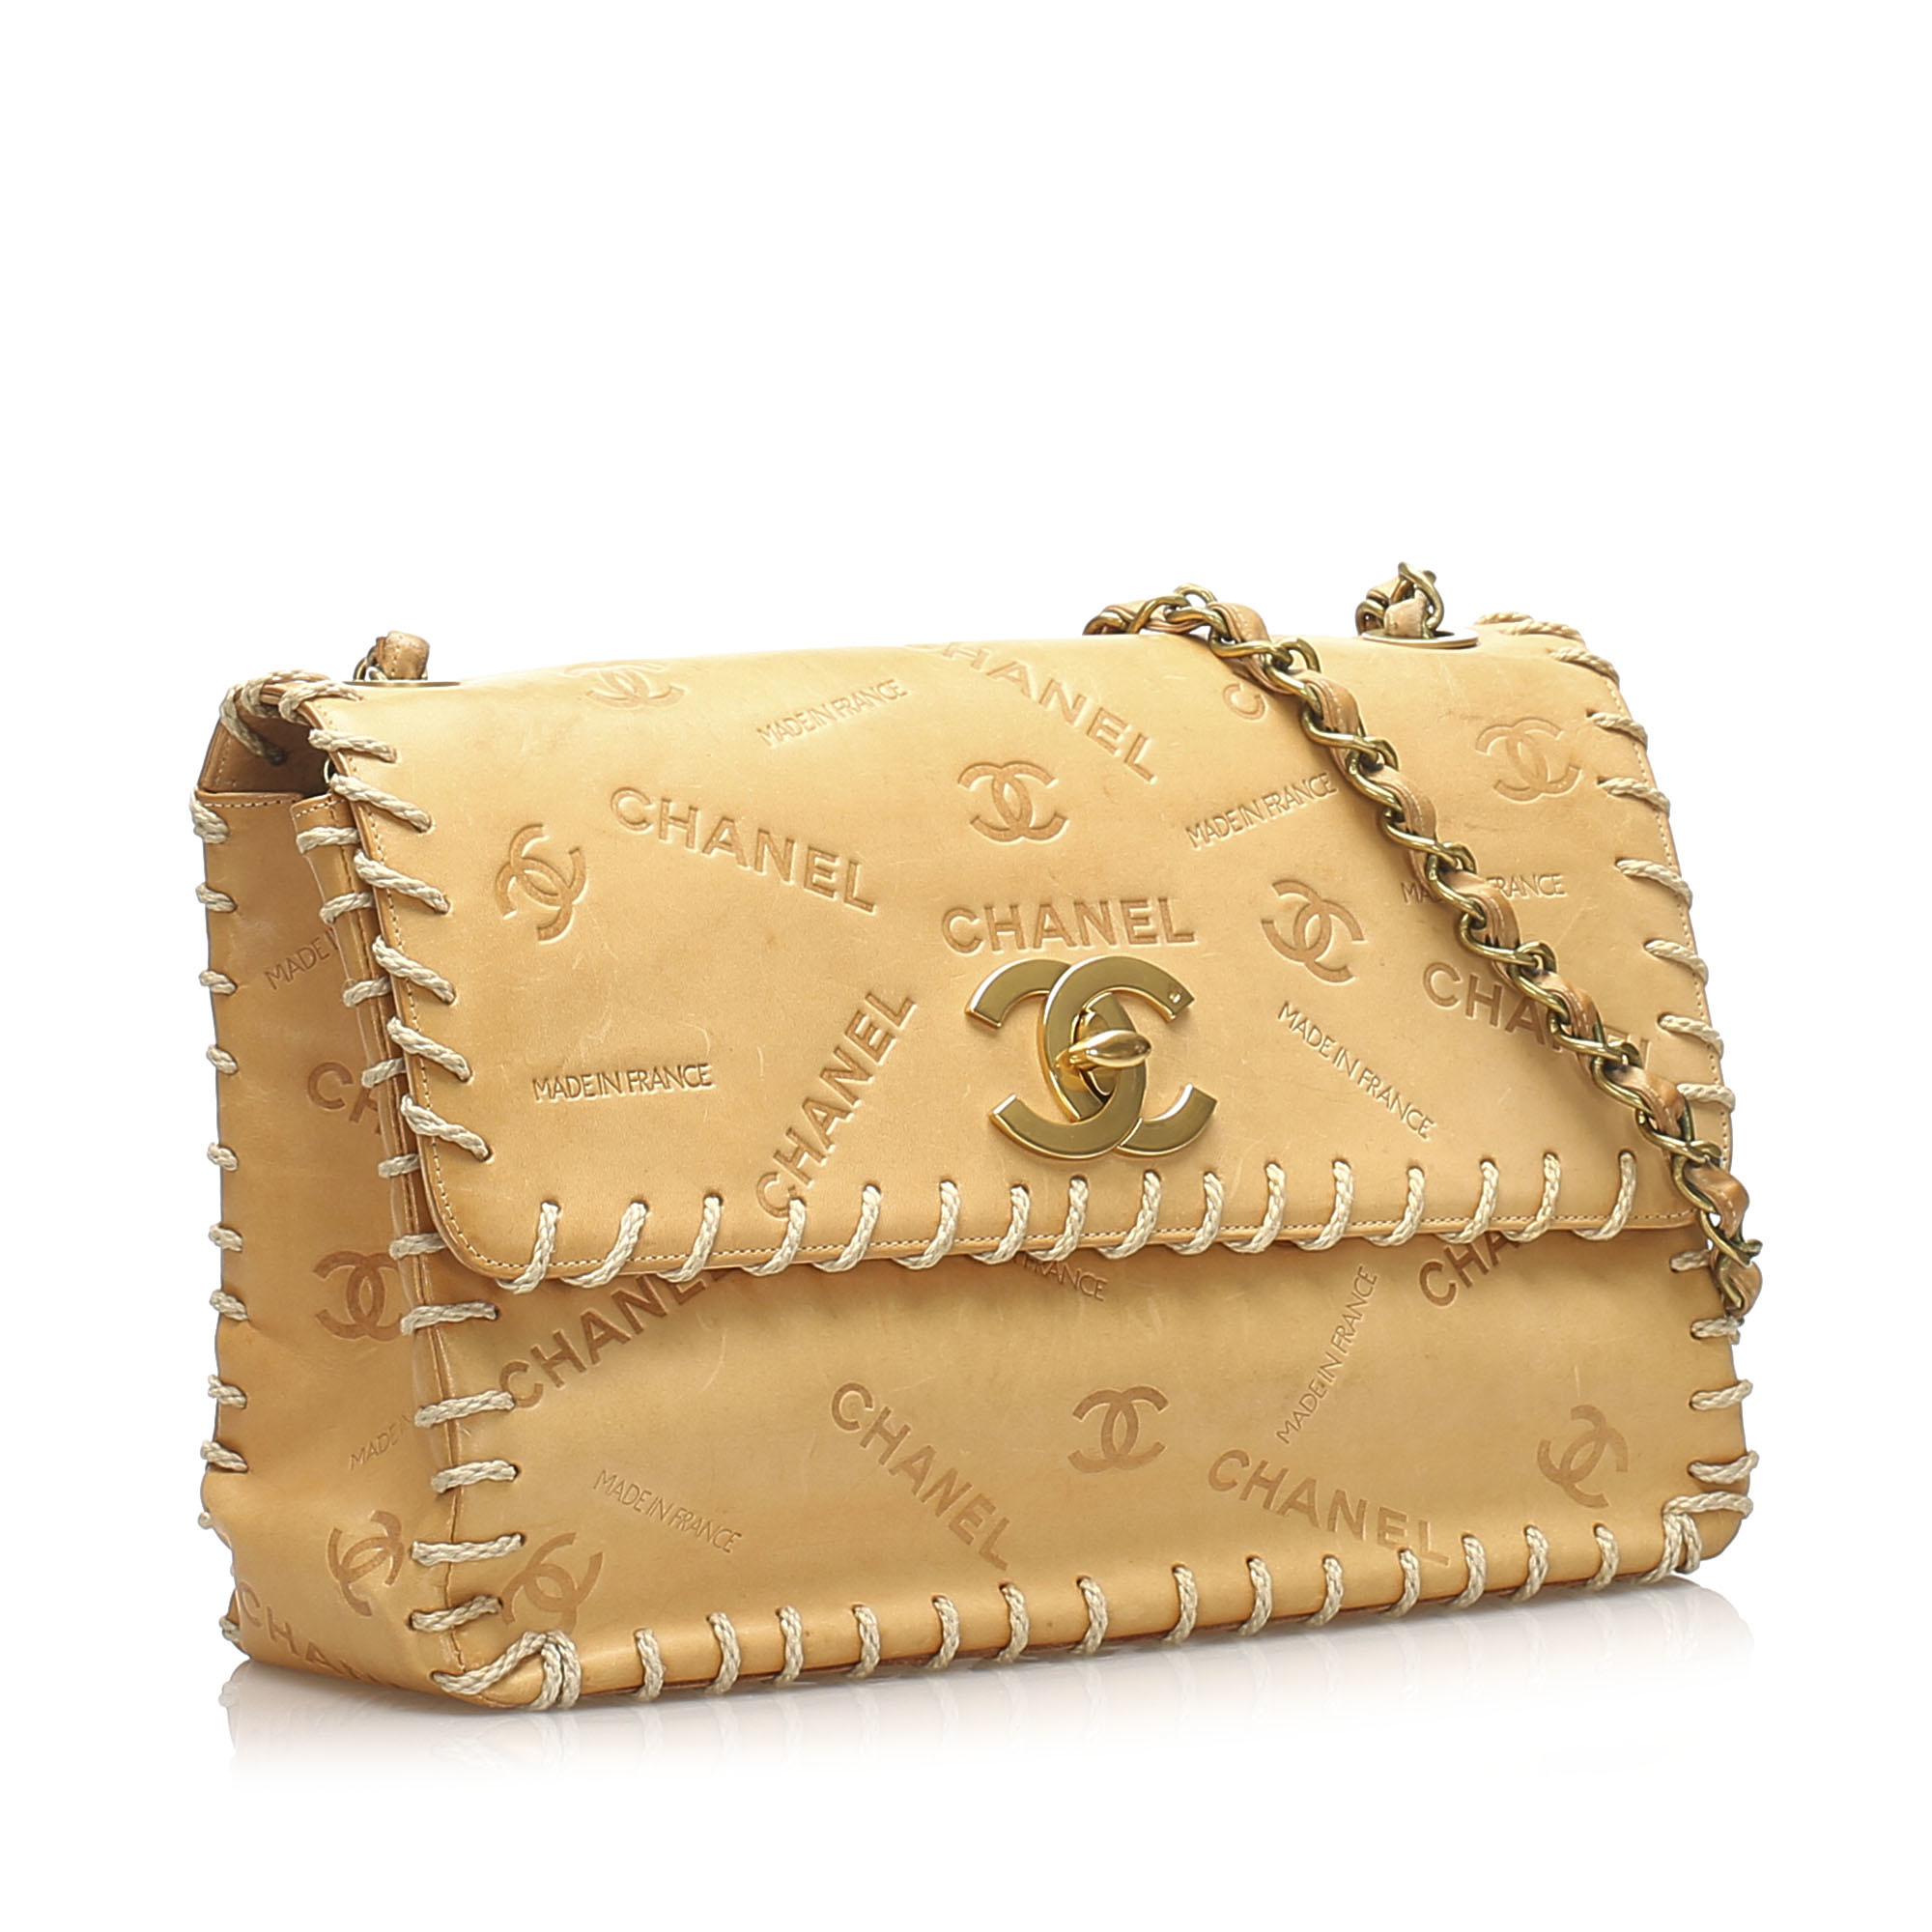 Chanel Turnlock Whipstitch Lambskin Leather Shoulder Bag - Marmalade